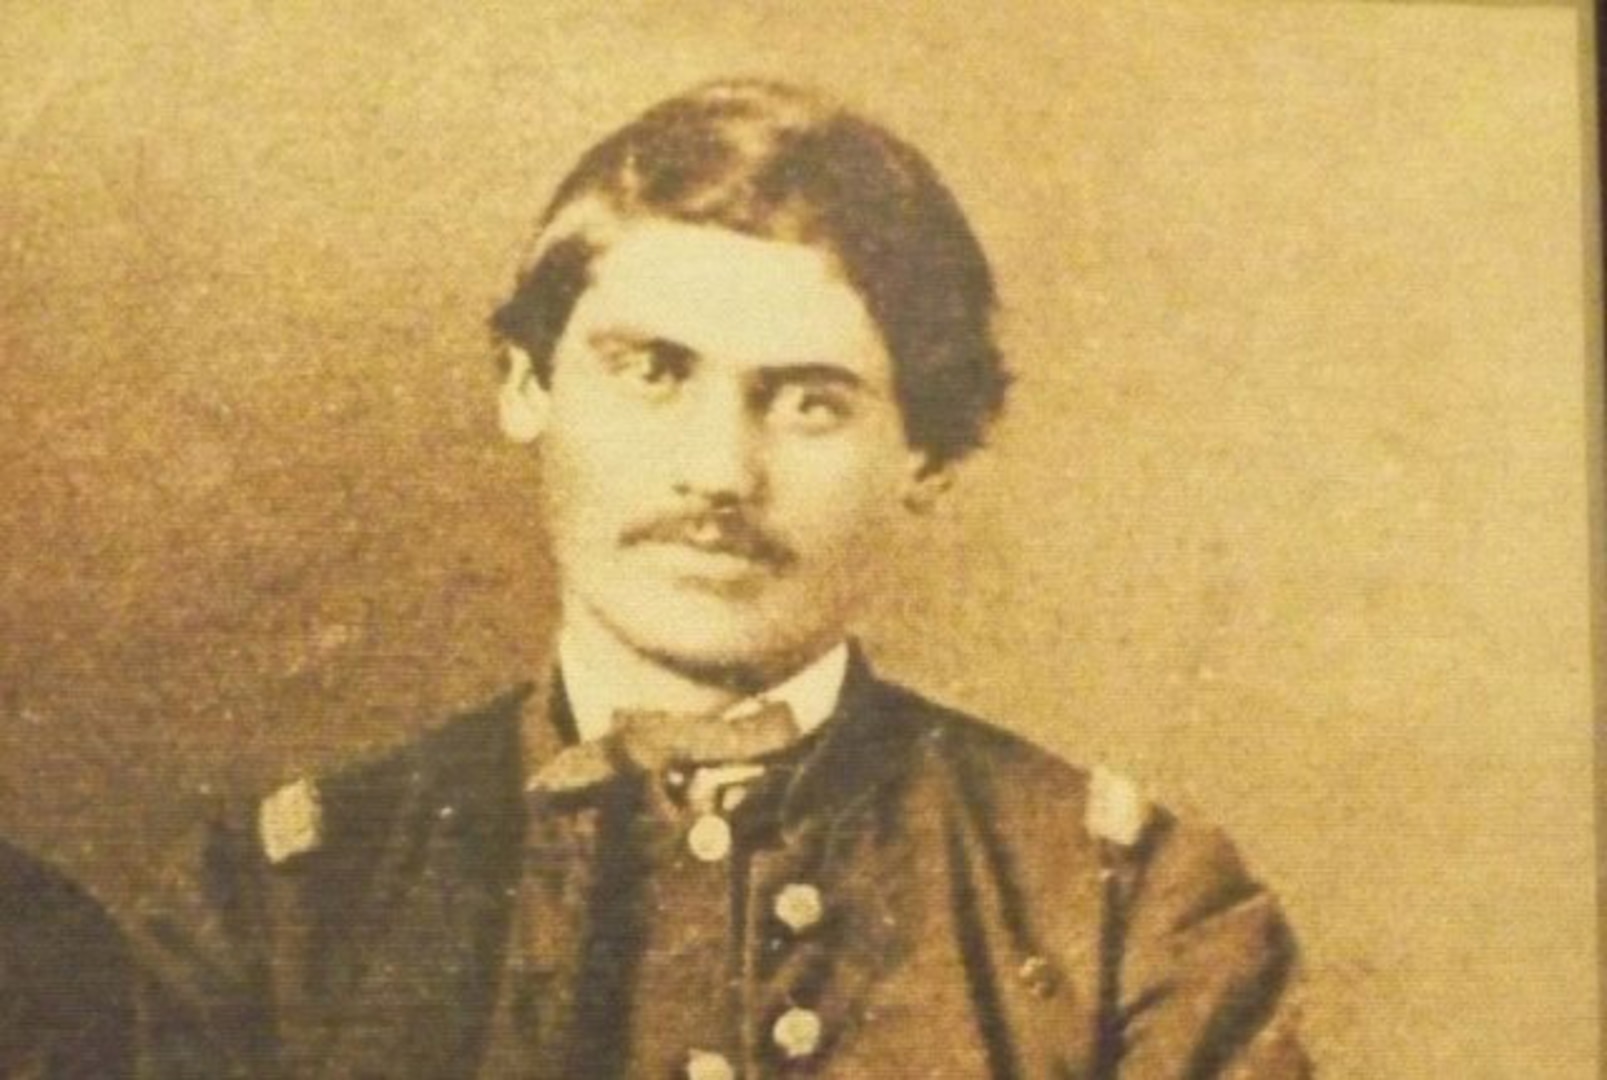 Army Pvt. Jacob Parrott, a member of the Ohio National Guard's predecessor, was the first recipient of the Medal of Honor in 1863.